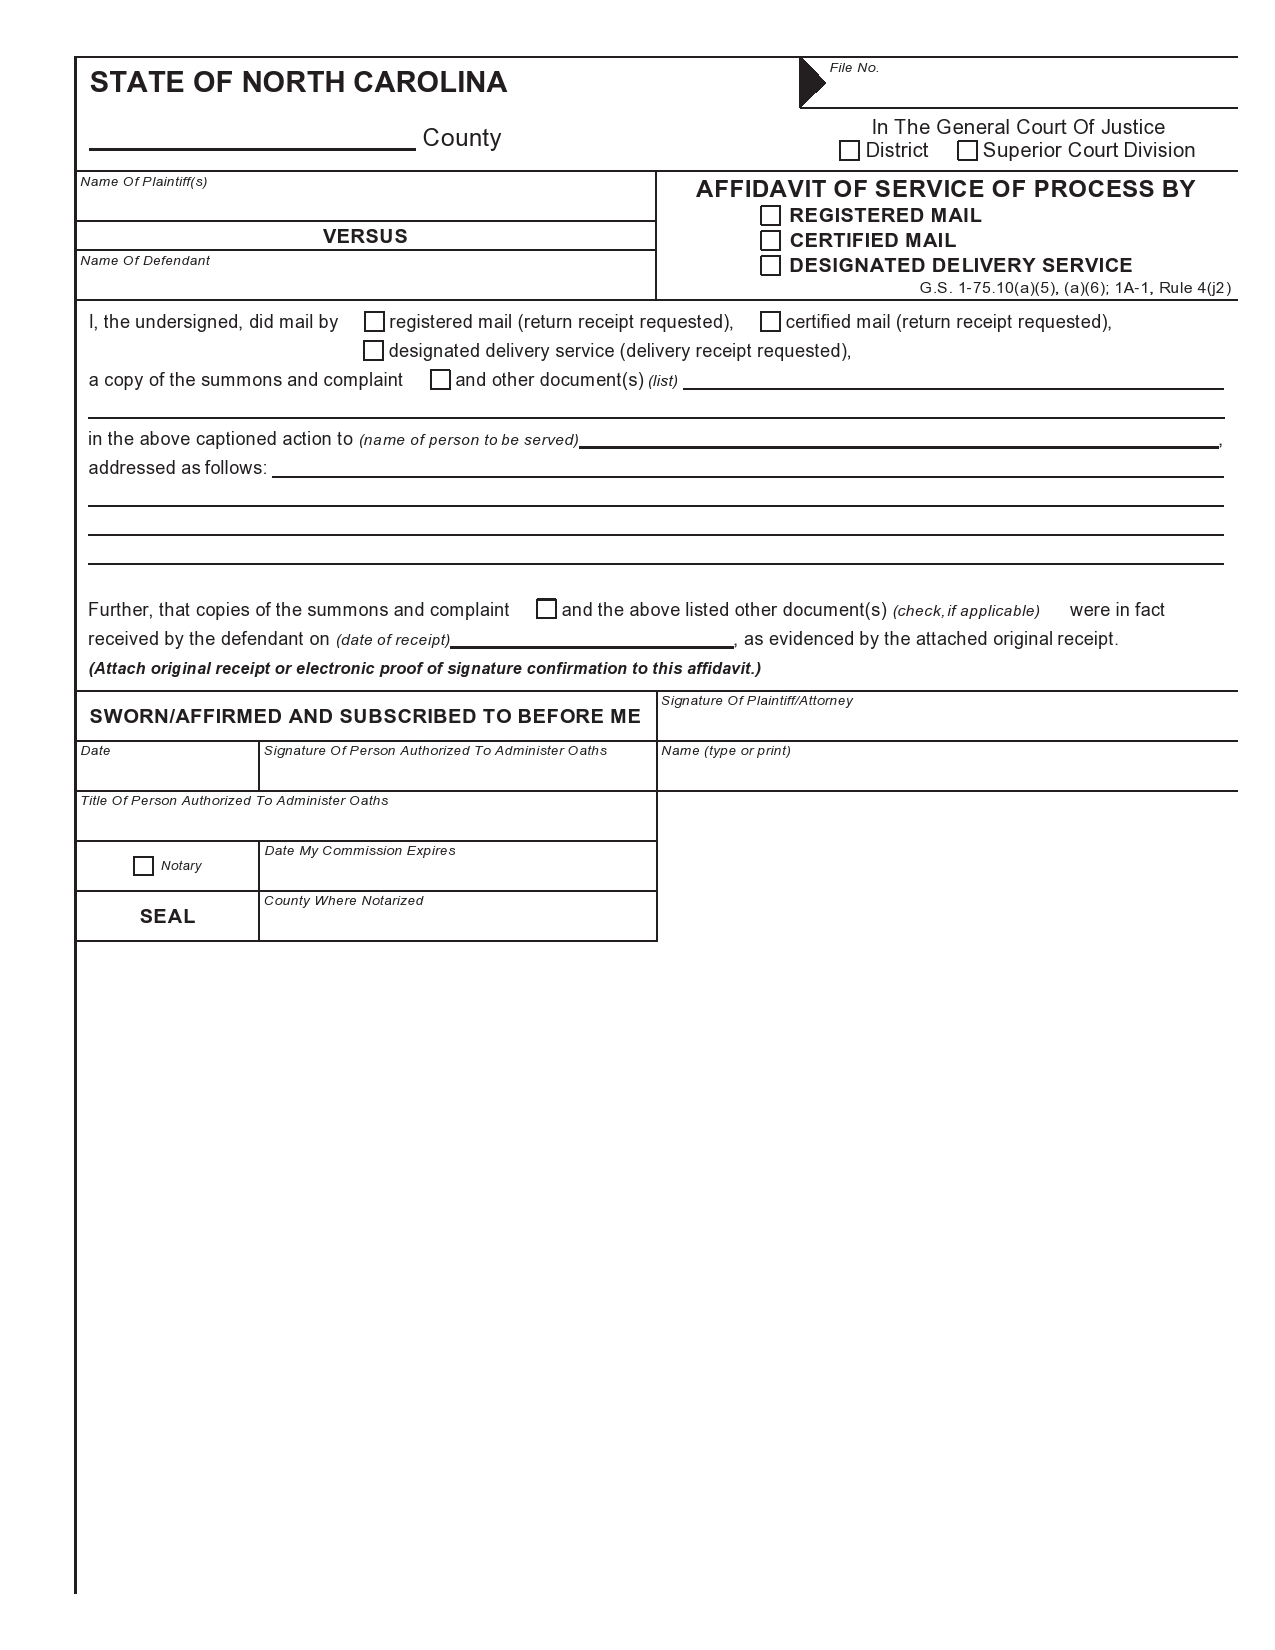 Free proof of service form 22